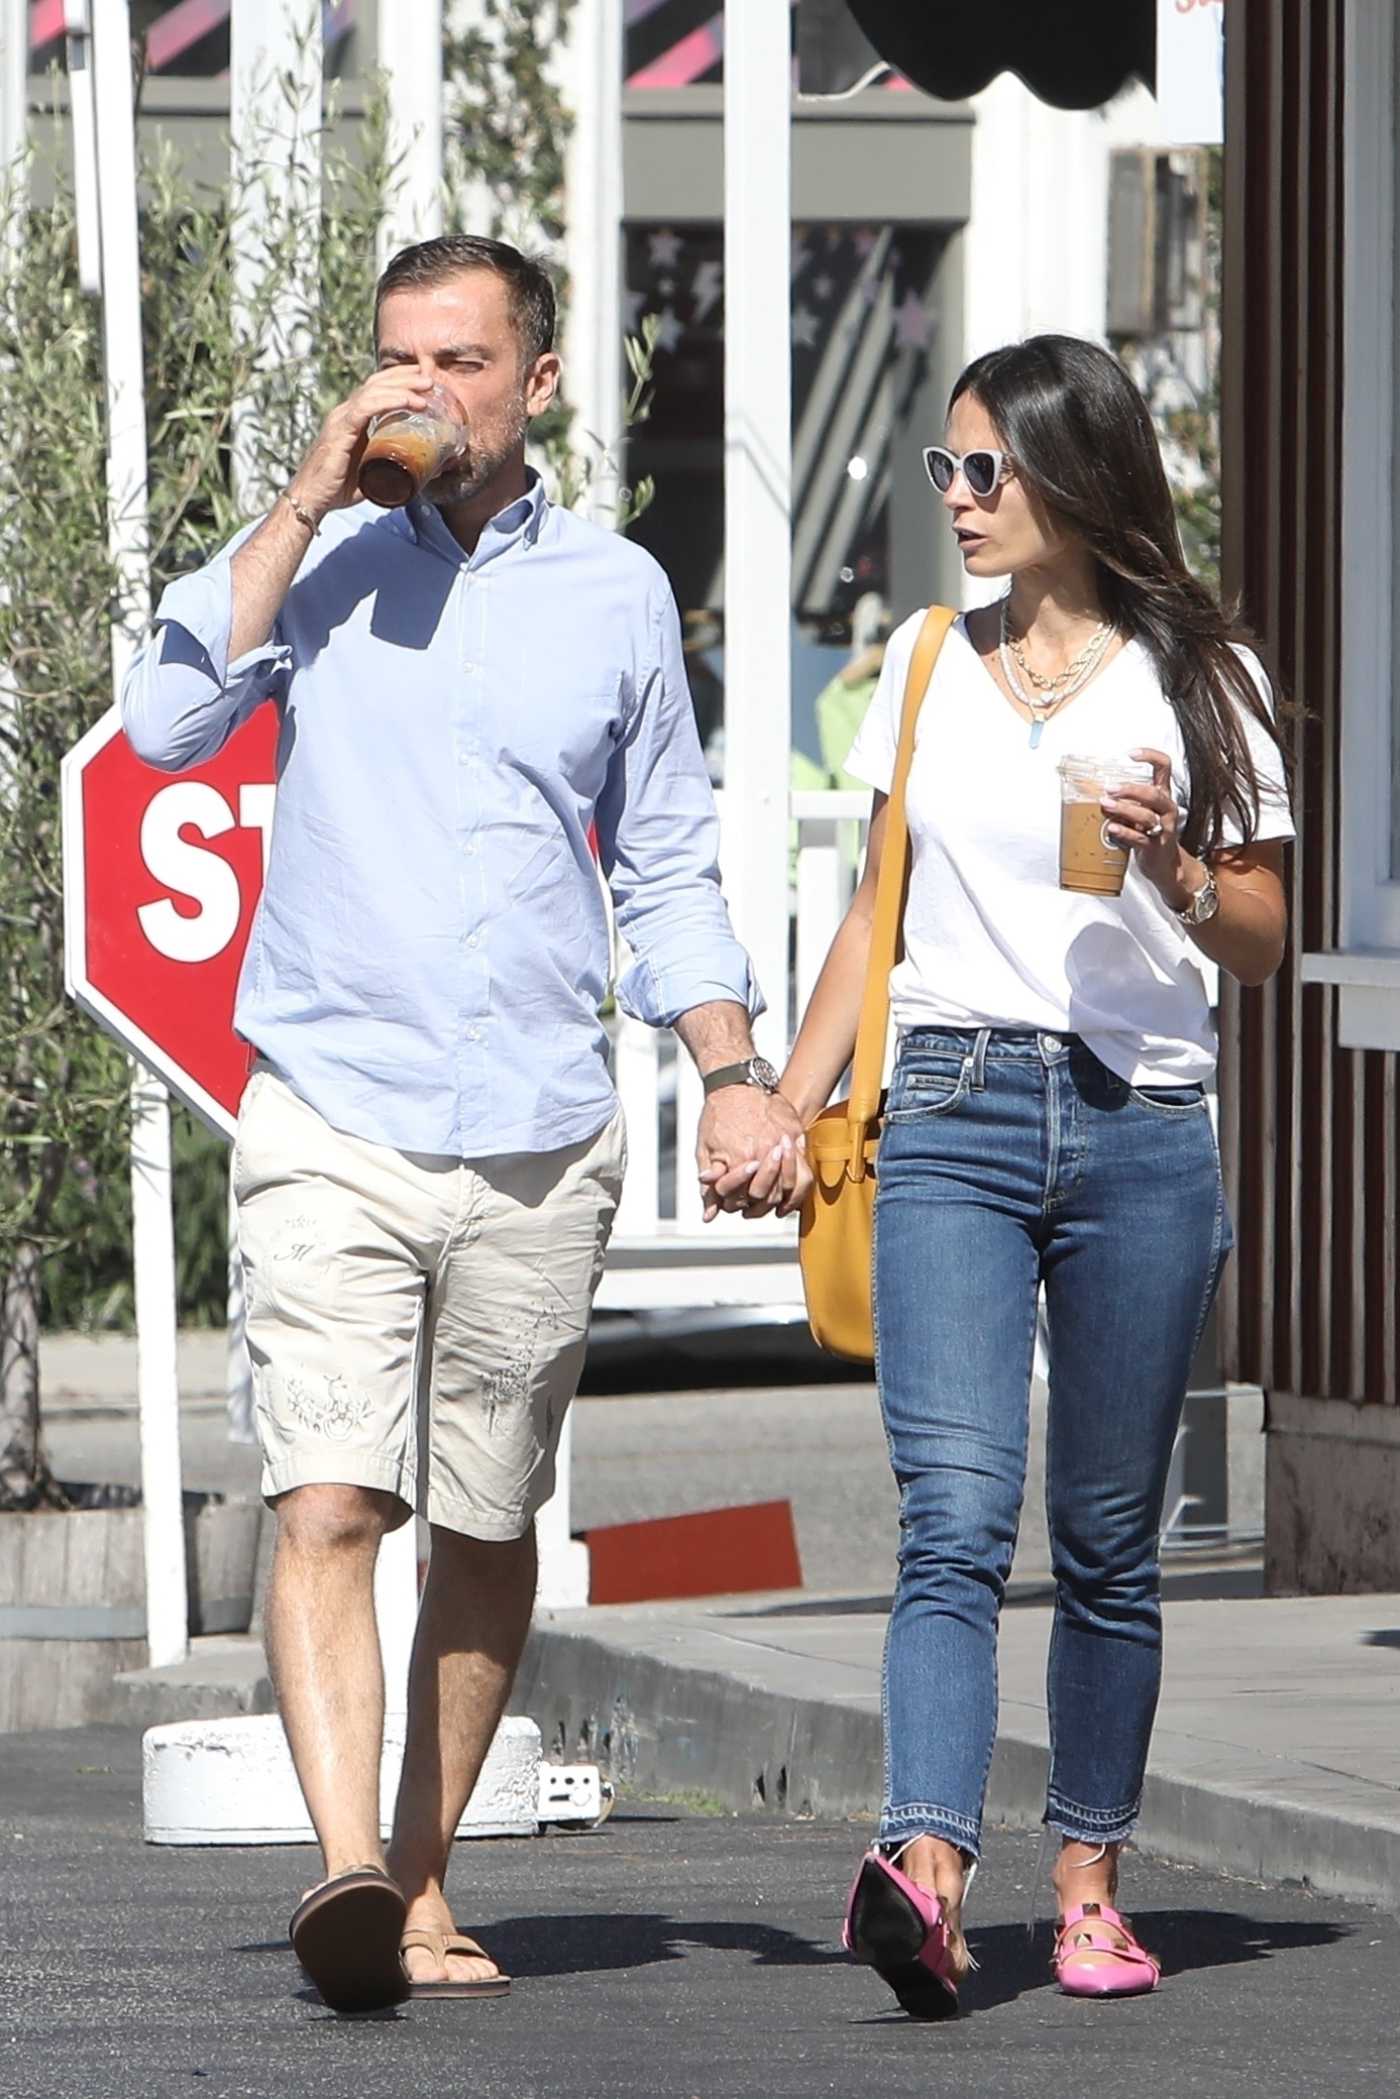 Jordana Brewster in a White Tee Was Seen During an Early Morning Coffee Run Out with Mason Morfit in Brentwood 06/24/2022